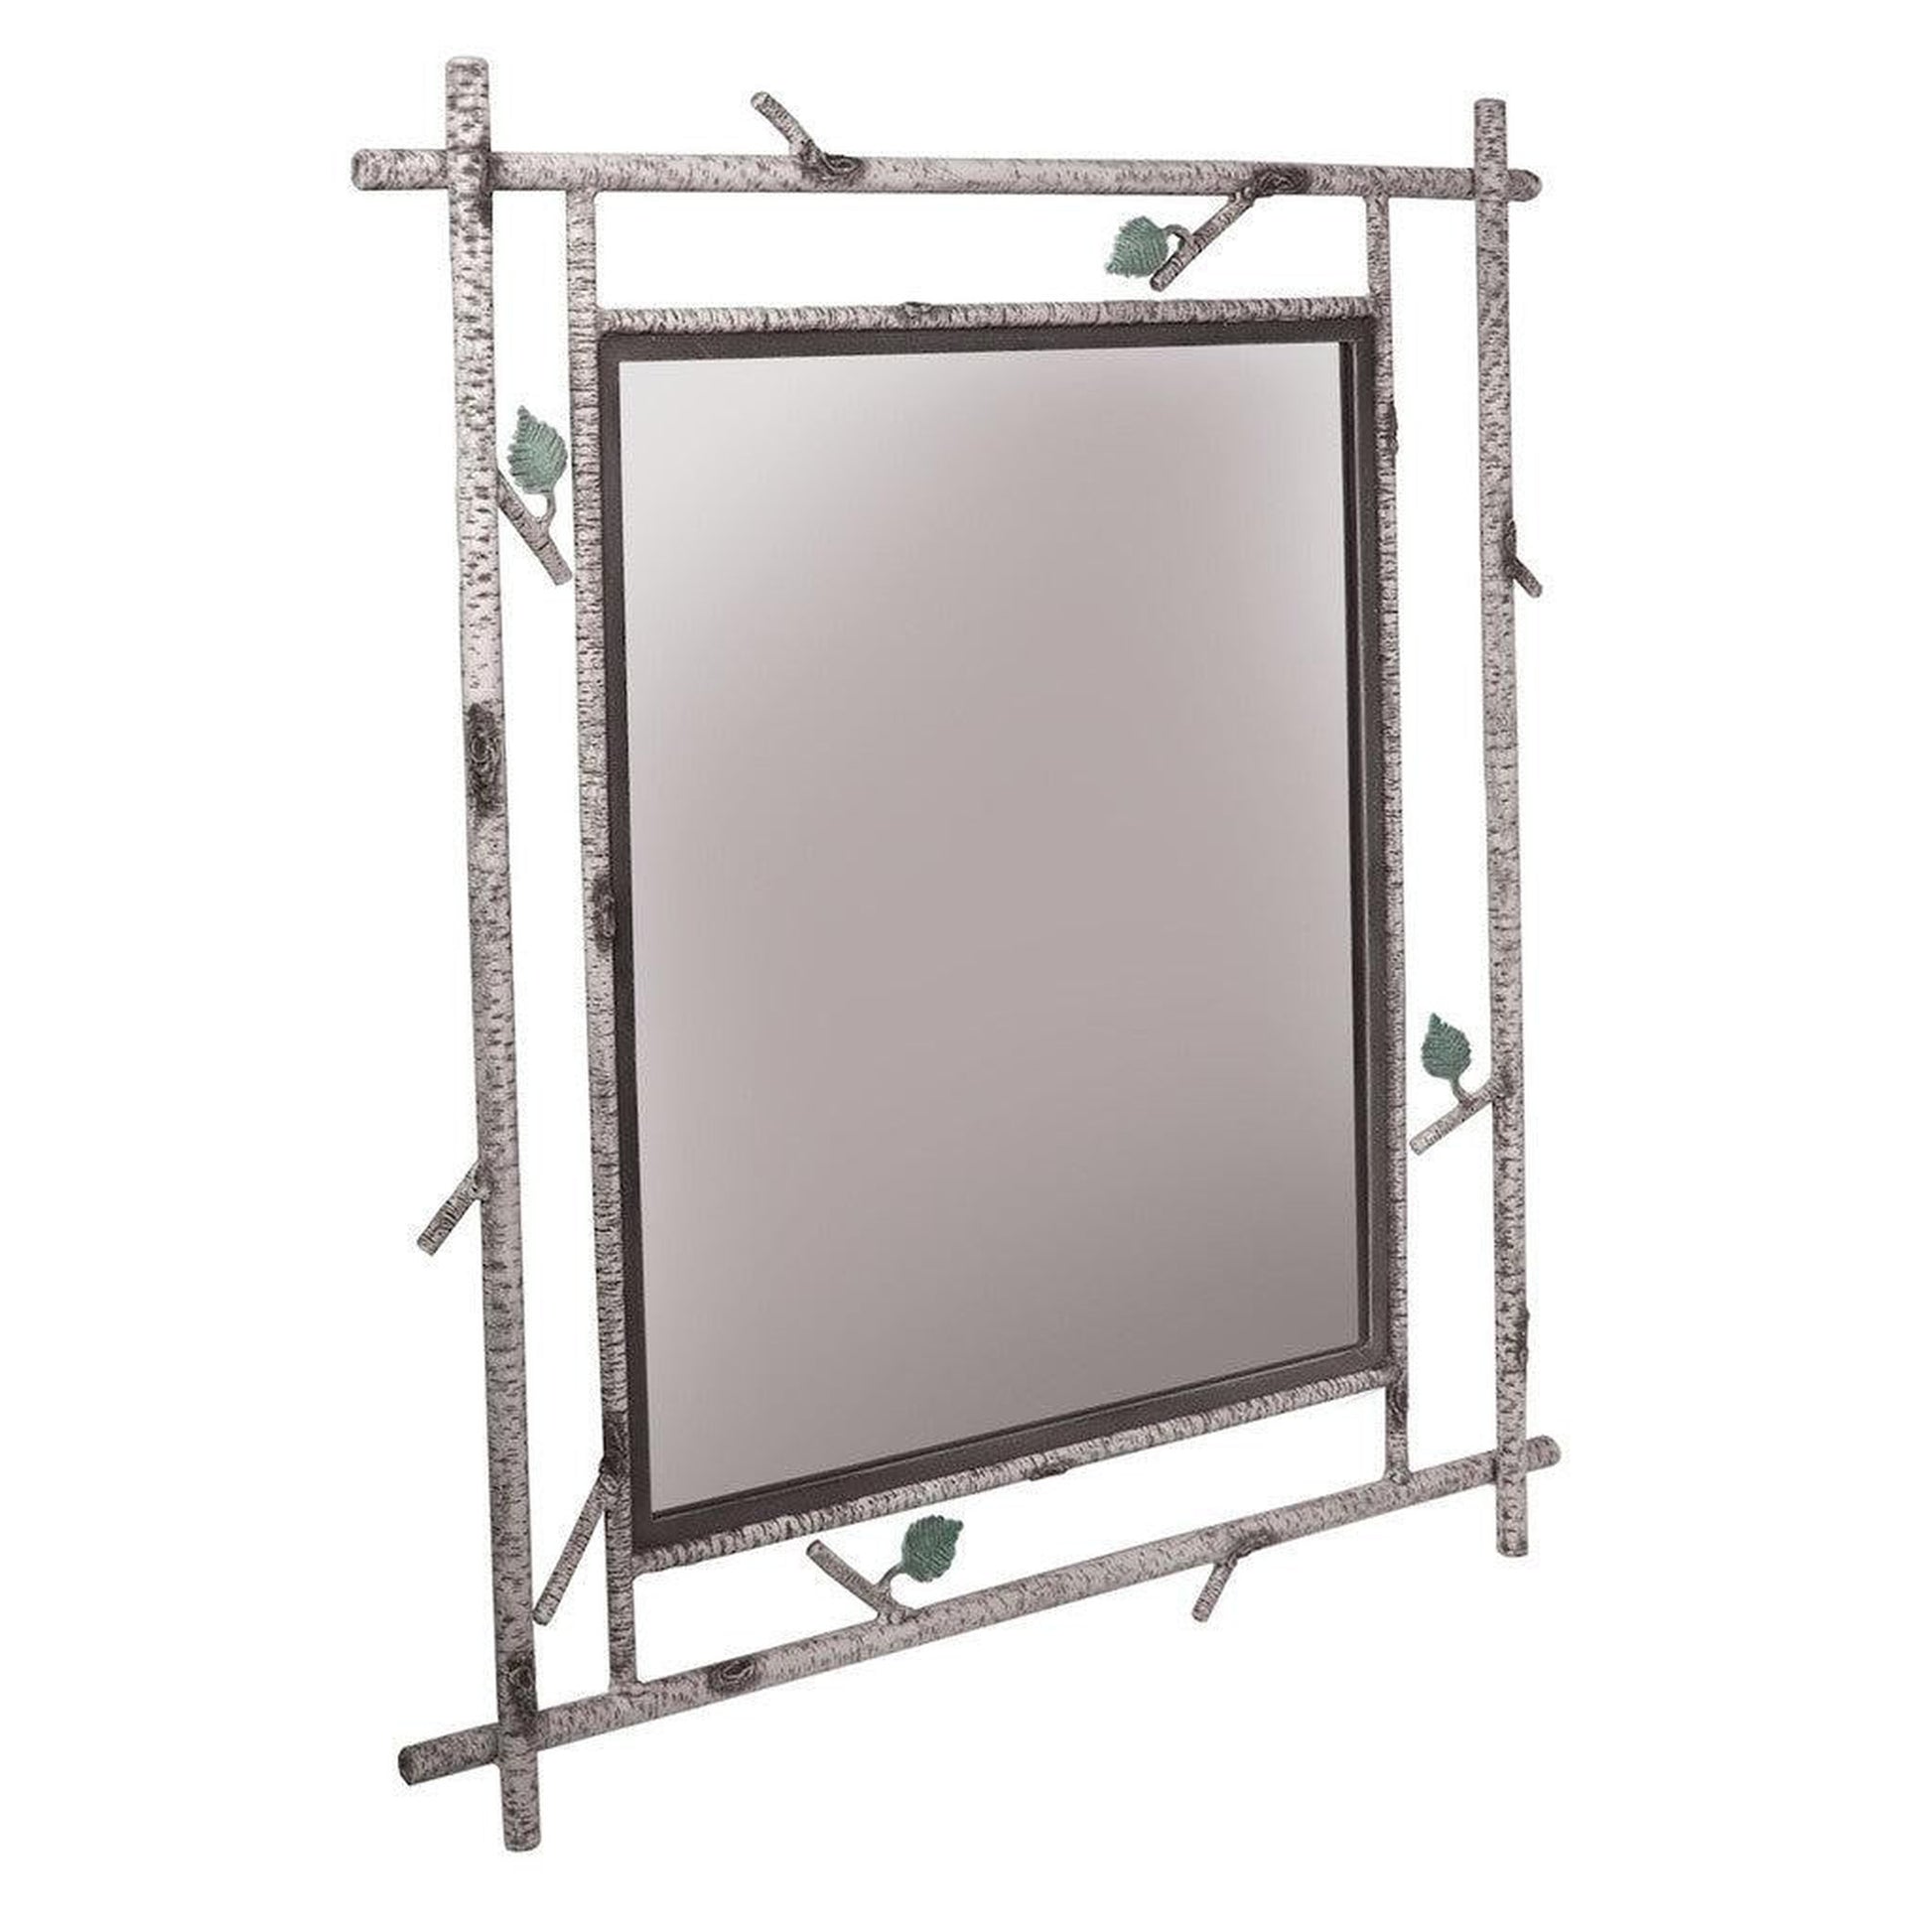 Stone County Ironworks Whisper Creek 30" x 34" Small Woodland Brown Iron Wall Mirror With Pewter Iron Accent